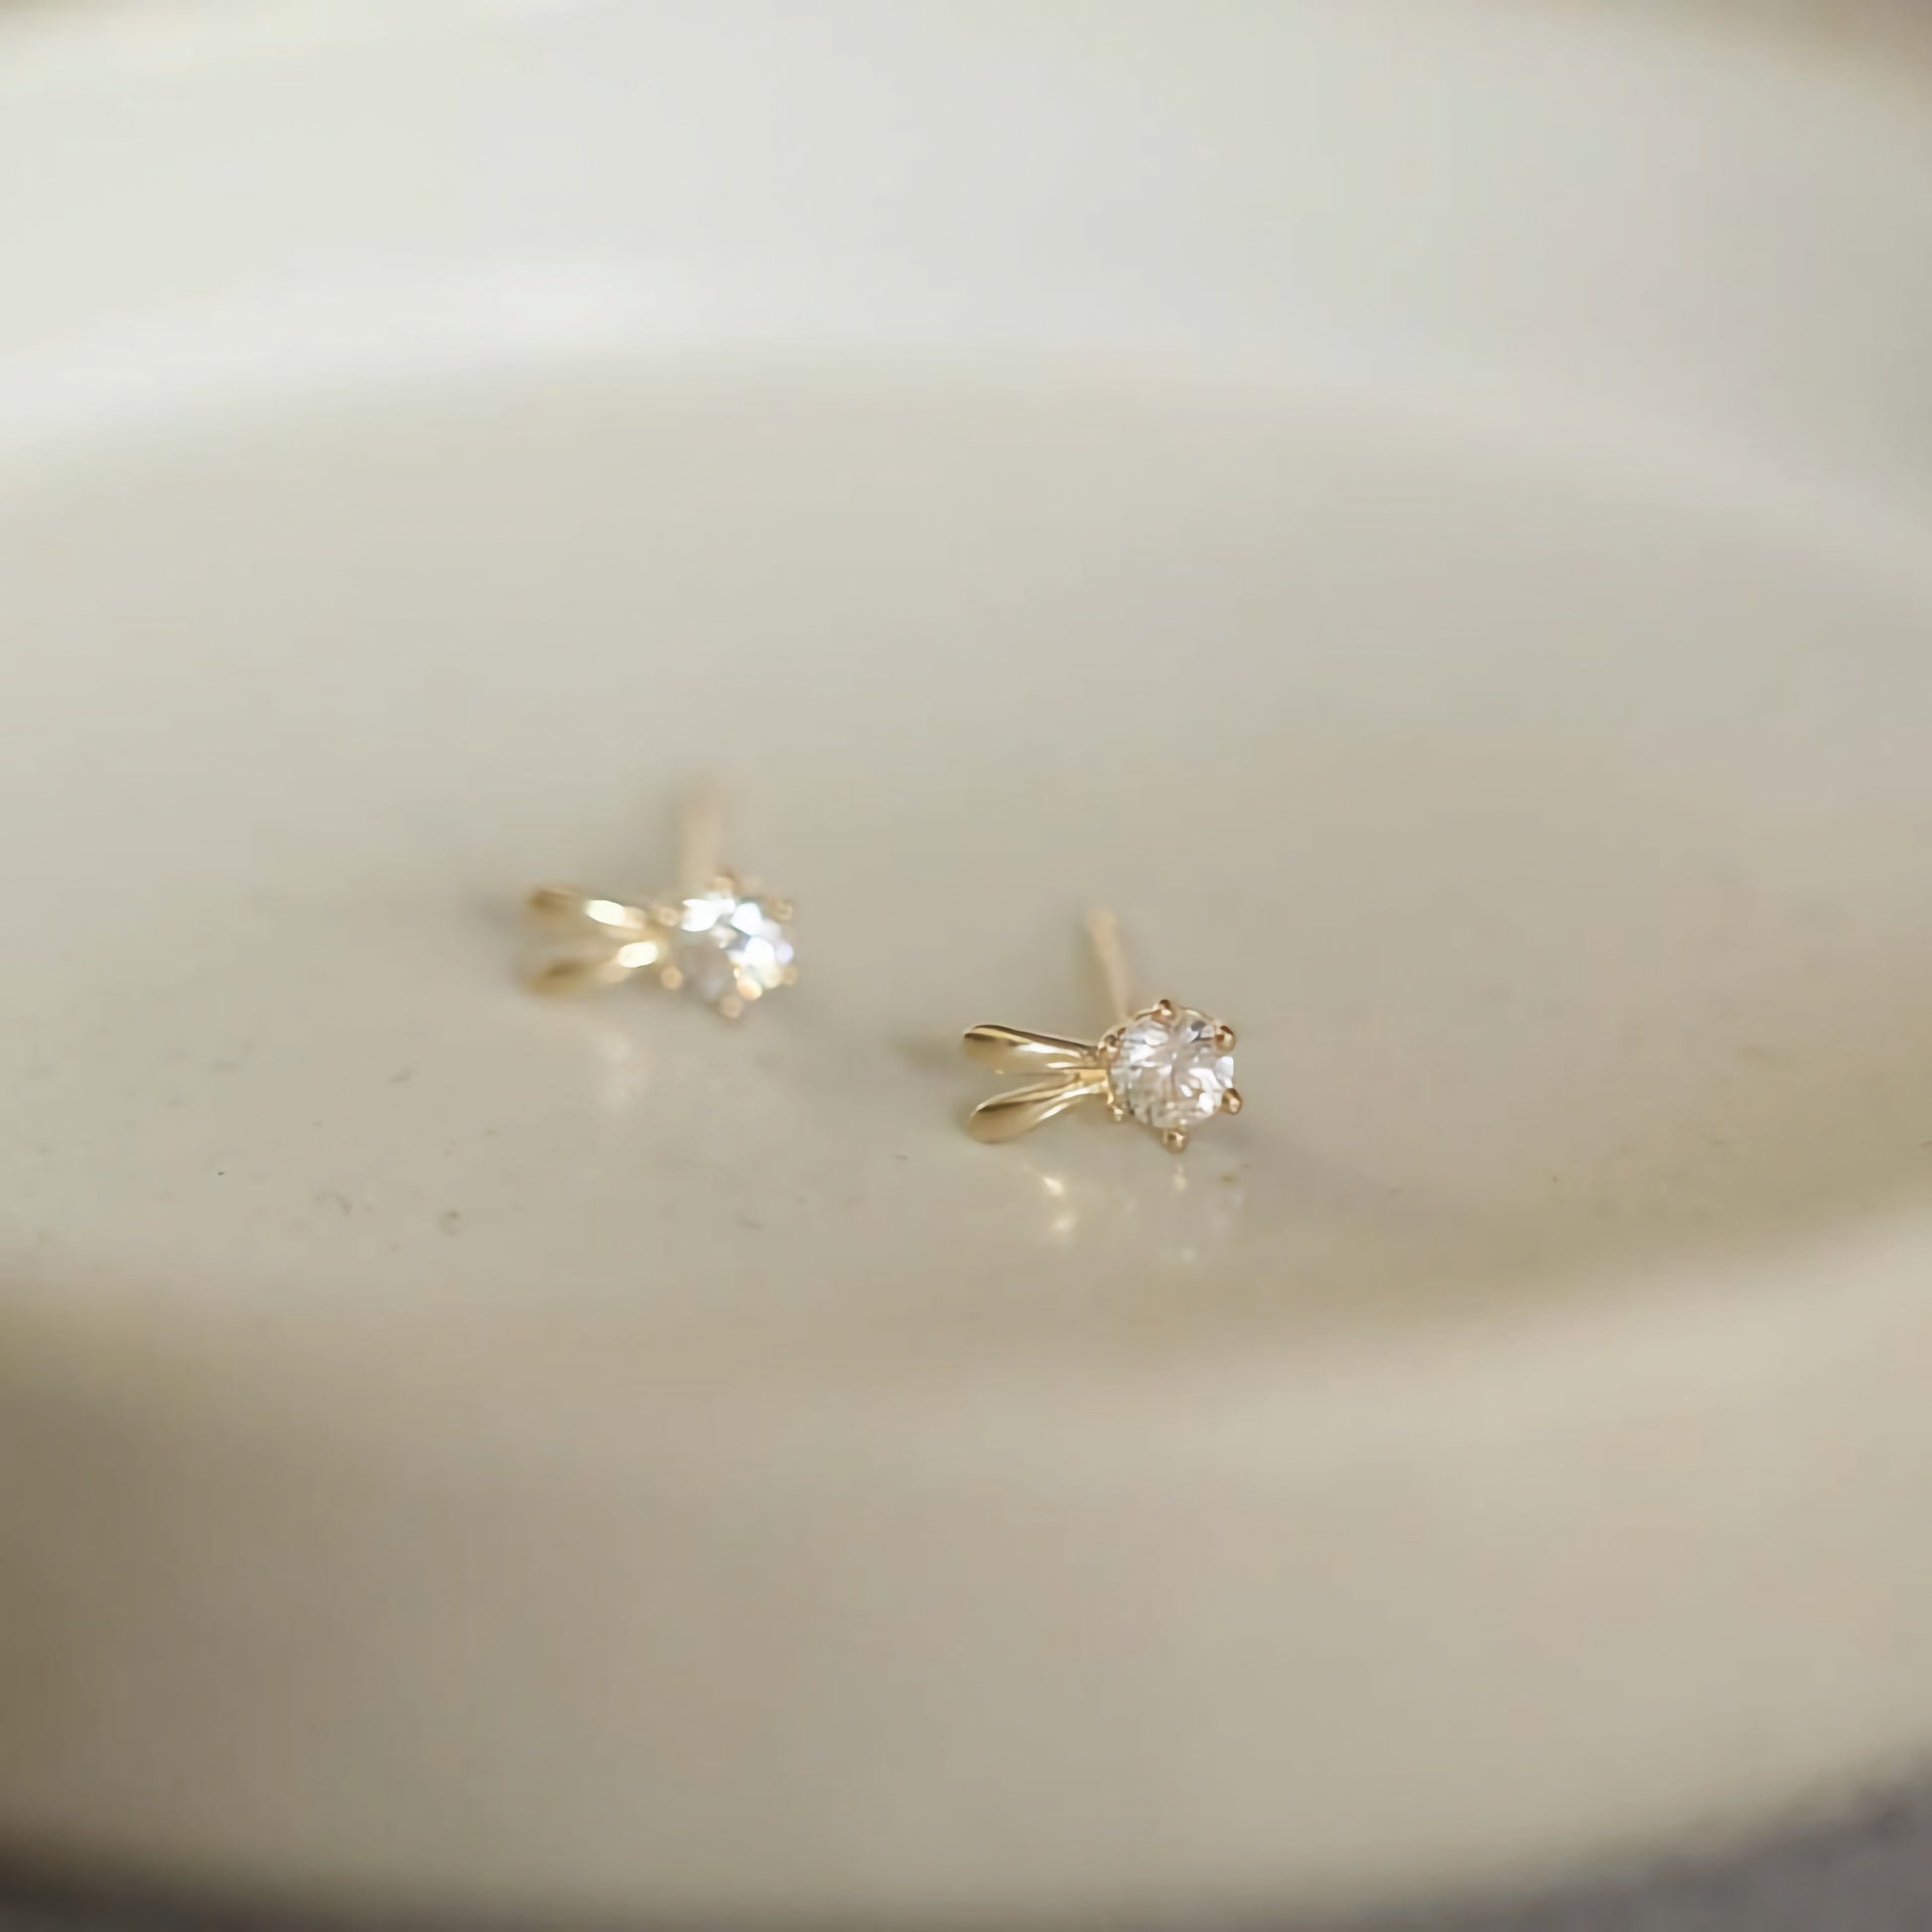 Close-up image of 9ct solid gold bunny ears studs, meticulously handcrafted for a playful aesthetic.